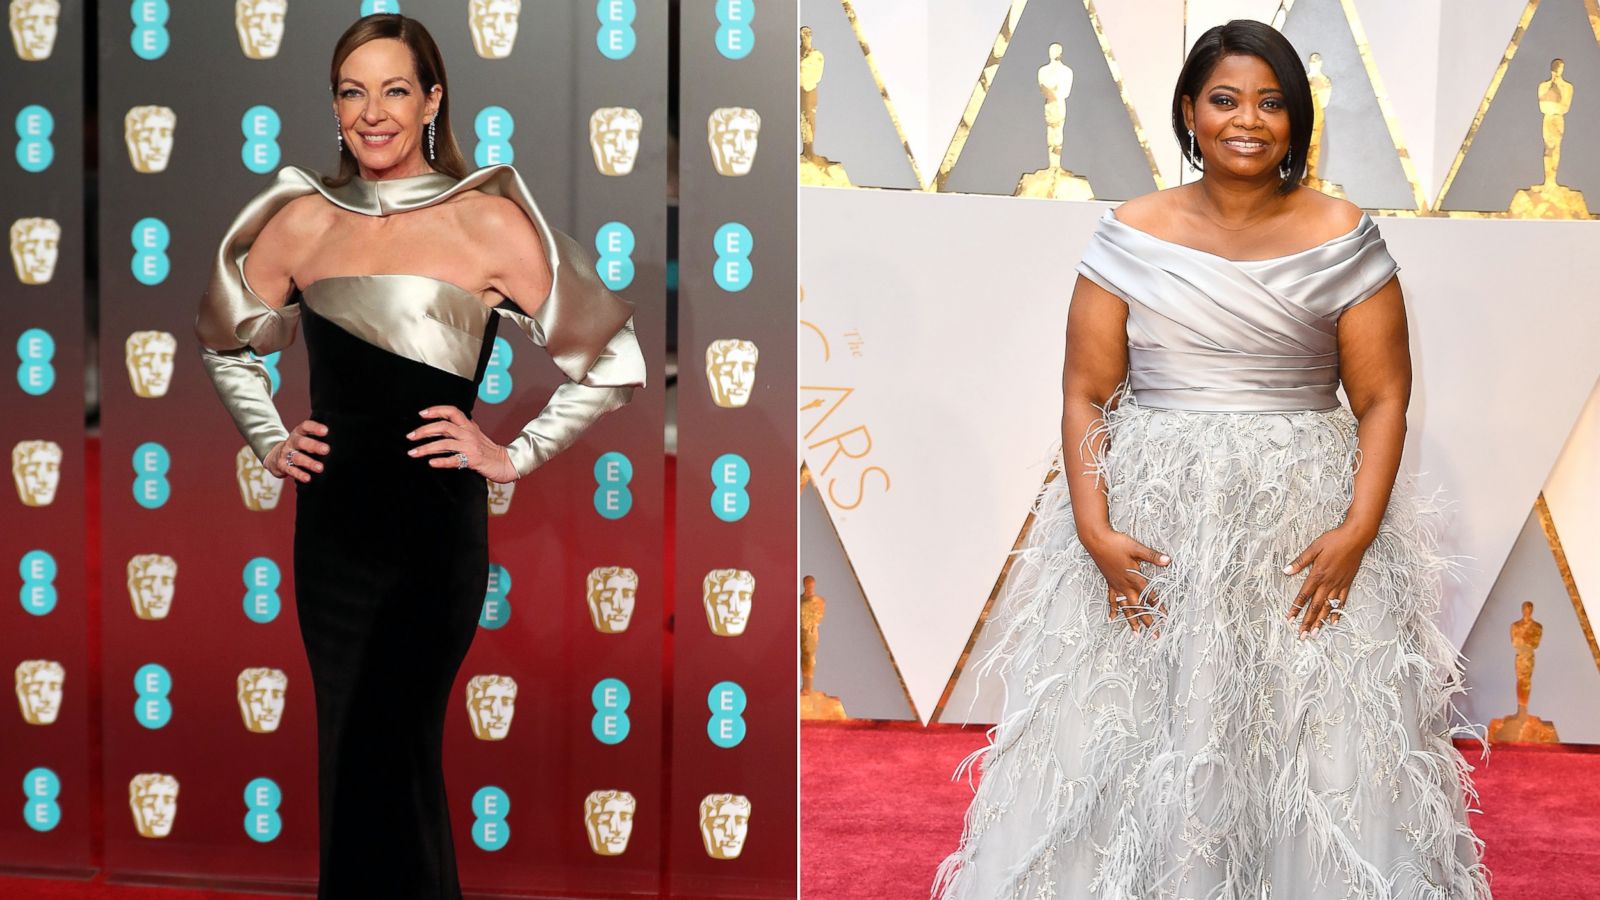 PHOTO: Allison Janney poses at the British Academy Film Awards at the Royal Albert Hall in London, Feb. 18, 2018 and Octavia Spencer arrives at the 89th Annual Academy Awards Feb. 26, 2017 in Hollywood.